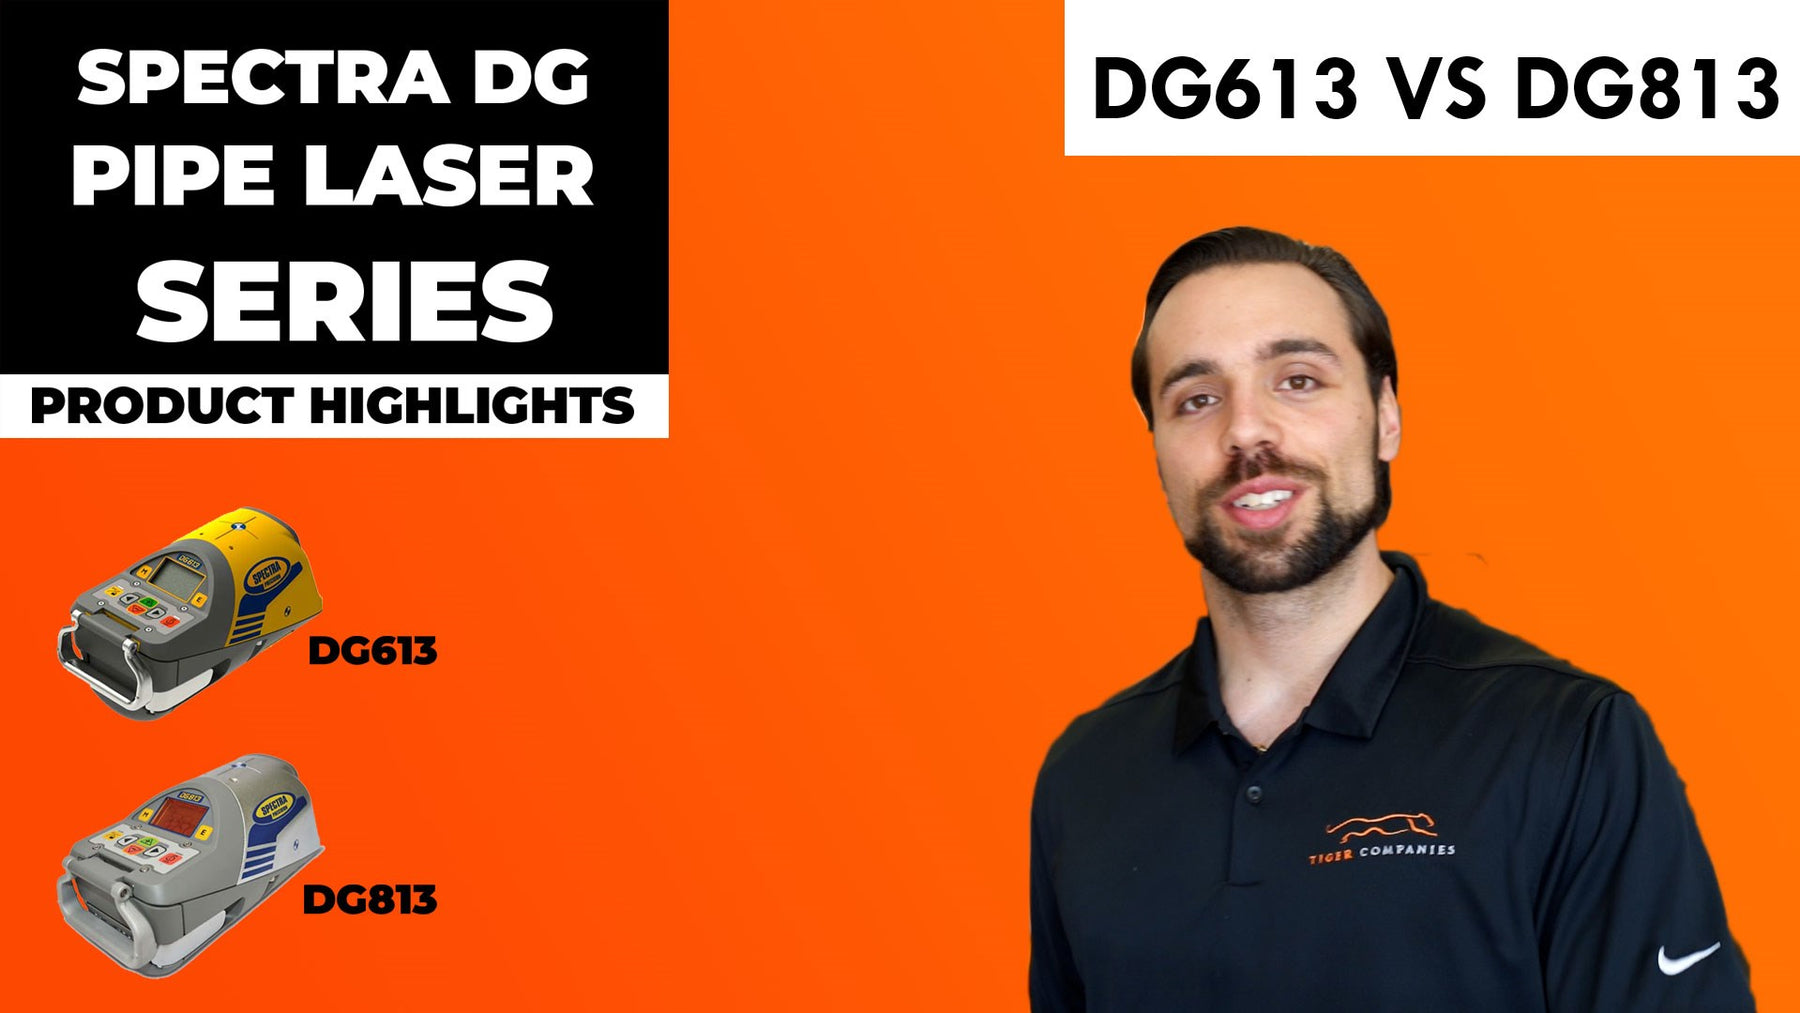 What's the Difference Between Spectra DG613 Pipe Laser and the Spectra DG813 Pipe Laser?